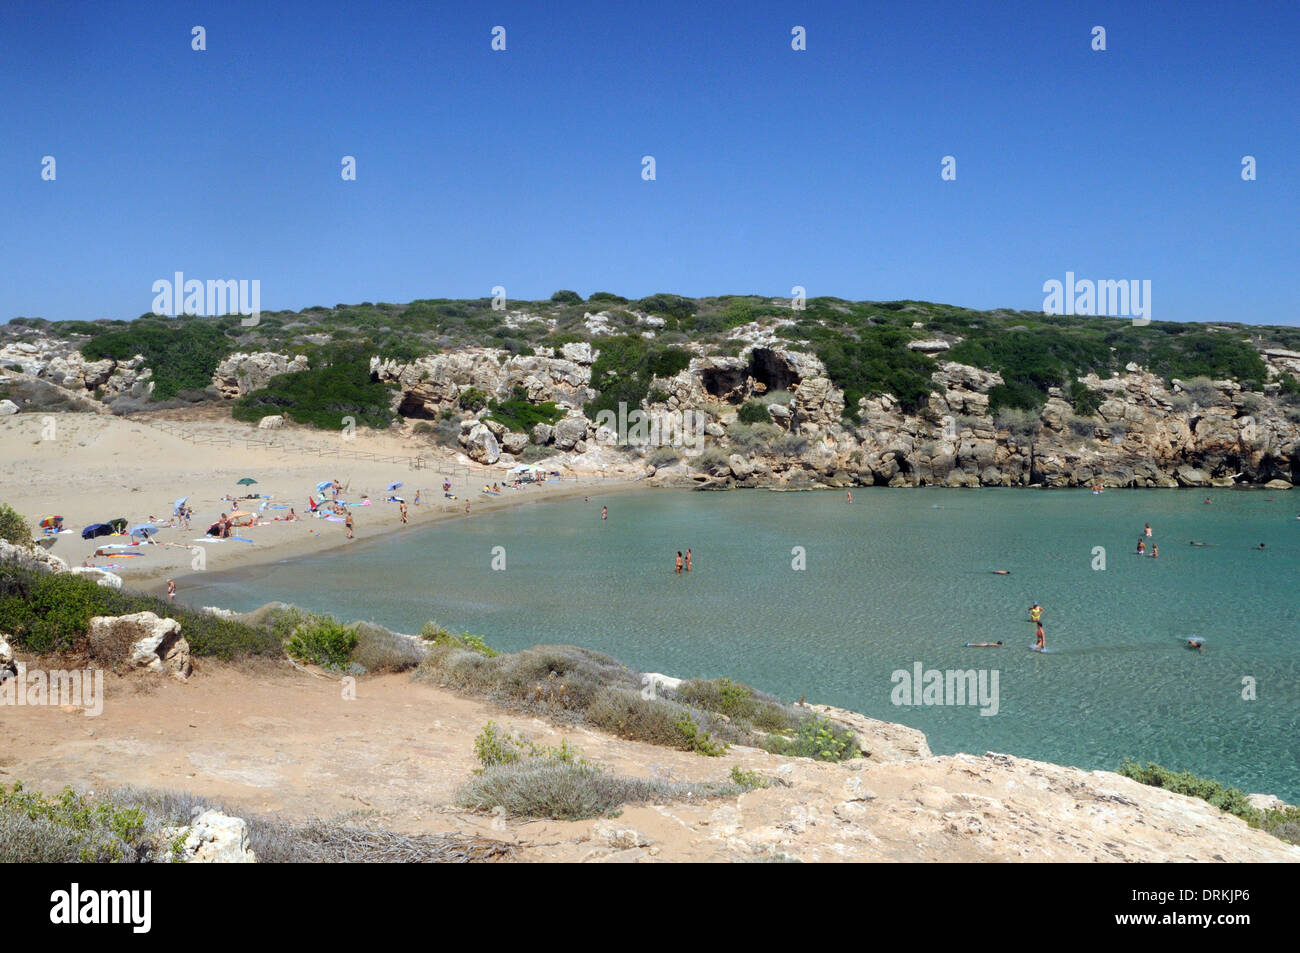 a view on the Calamosche beach, the beautiful beach in the Vendicari natural reserve Stock Photo